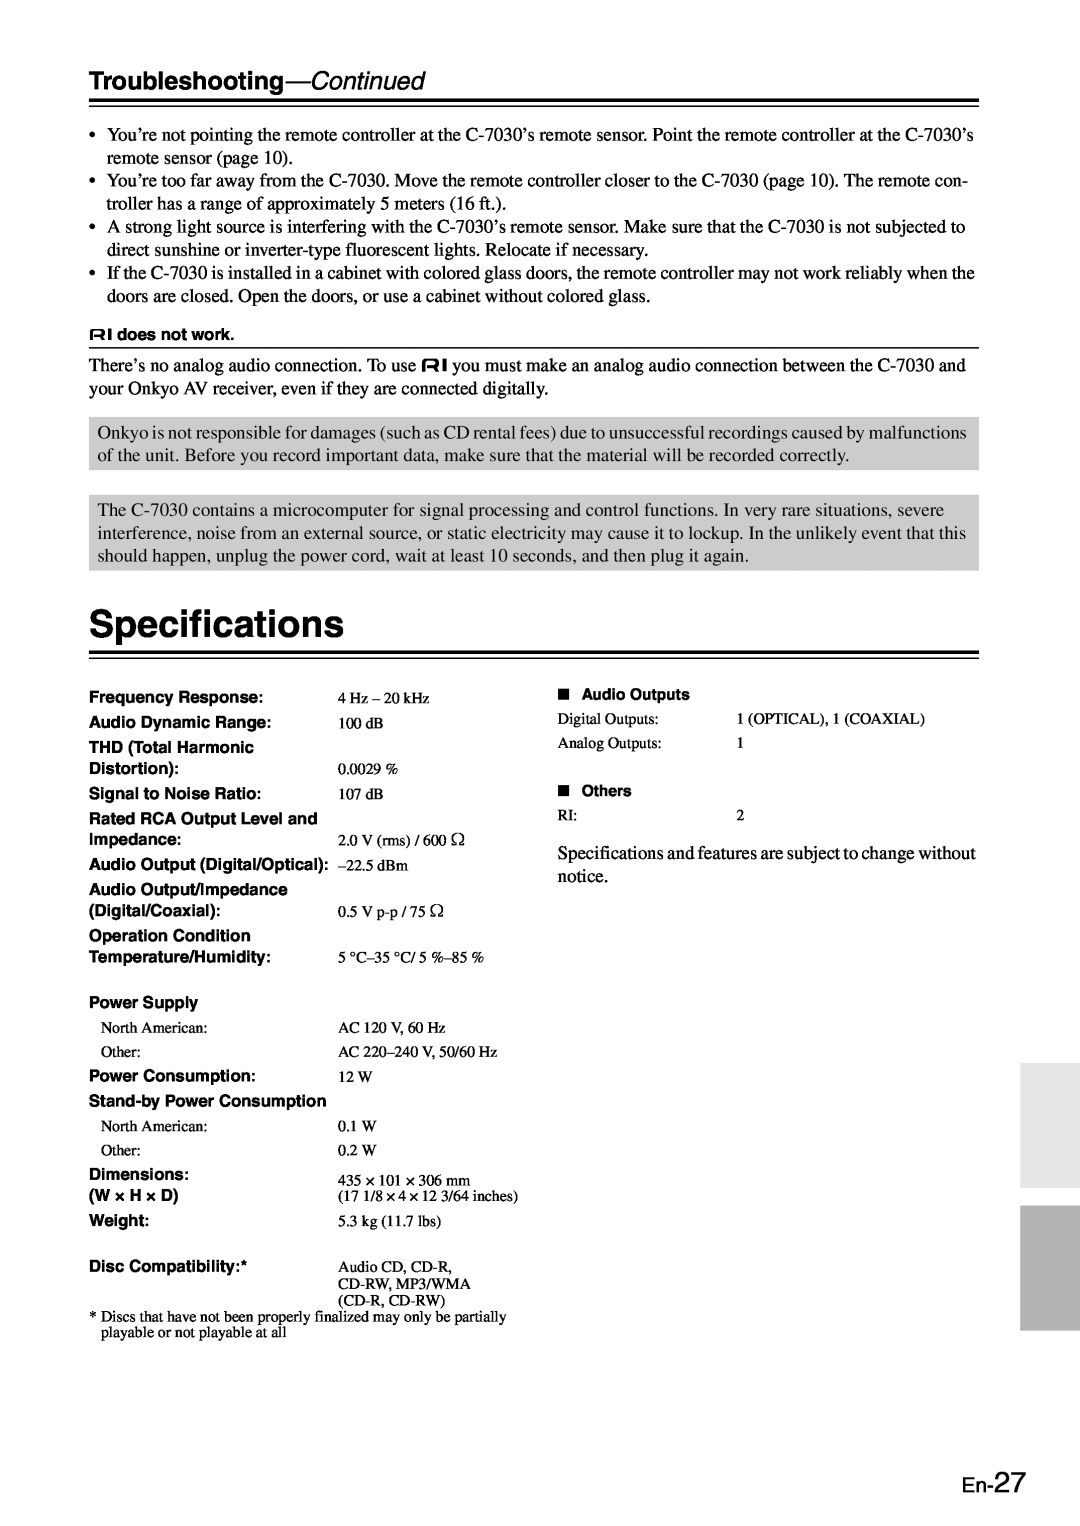 Onkyo C-7030 instruction manual Specifications, Troubleshooting-Continued, En-27 